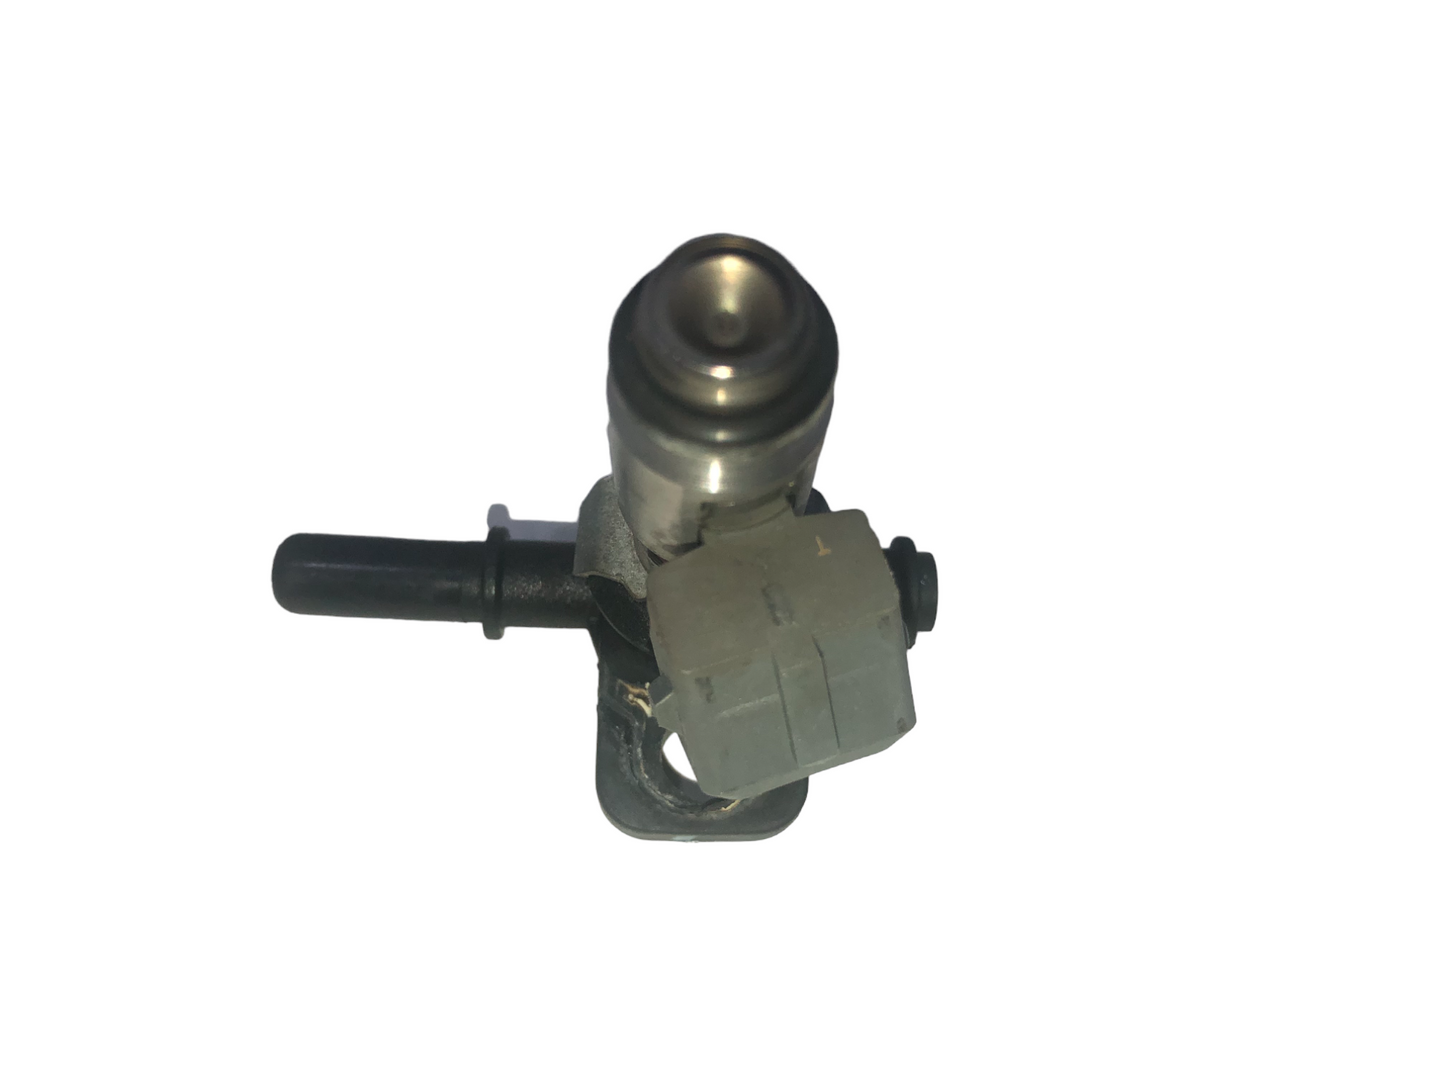 INJECTOR PIAGGIO CARNABY CRUISER 300 2008 2013 IGNJECTOR THROTTLE BODY